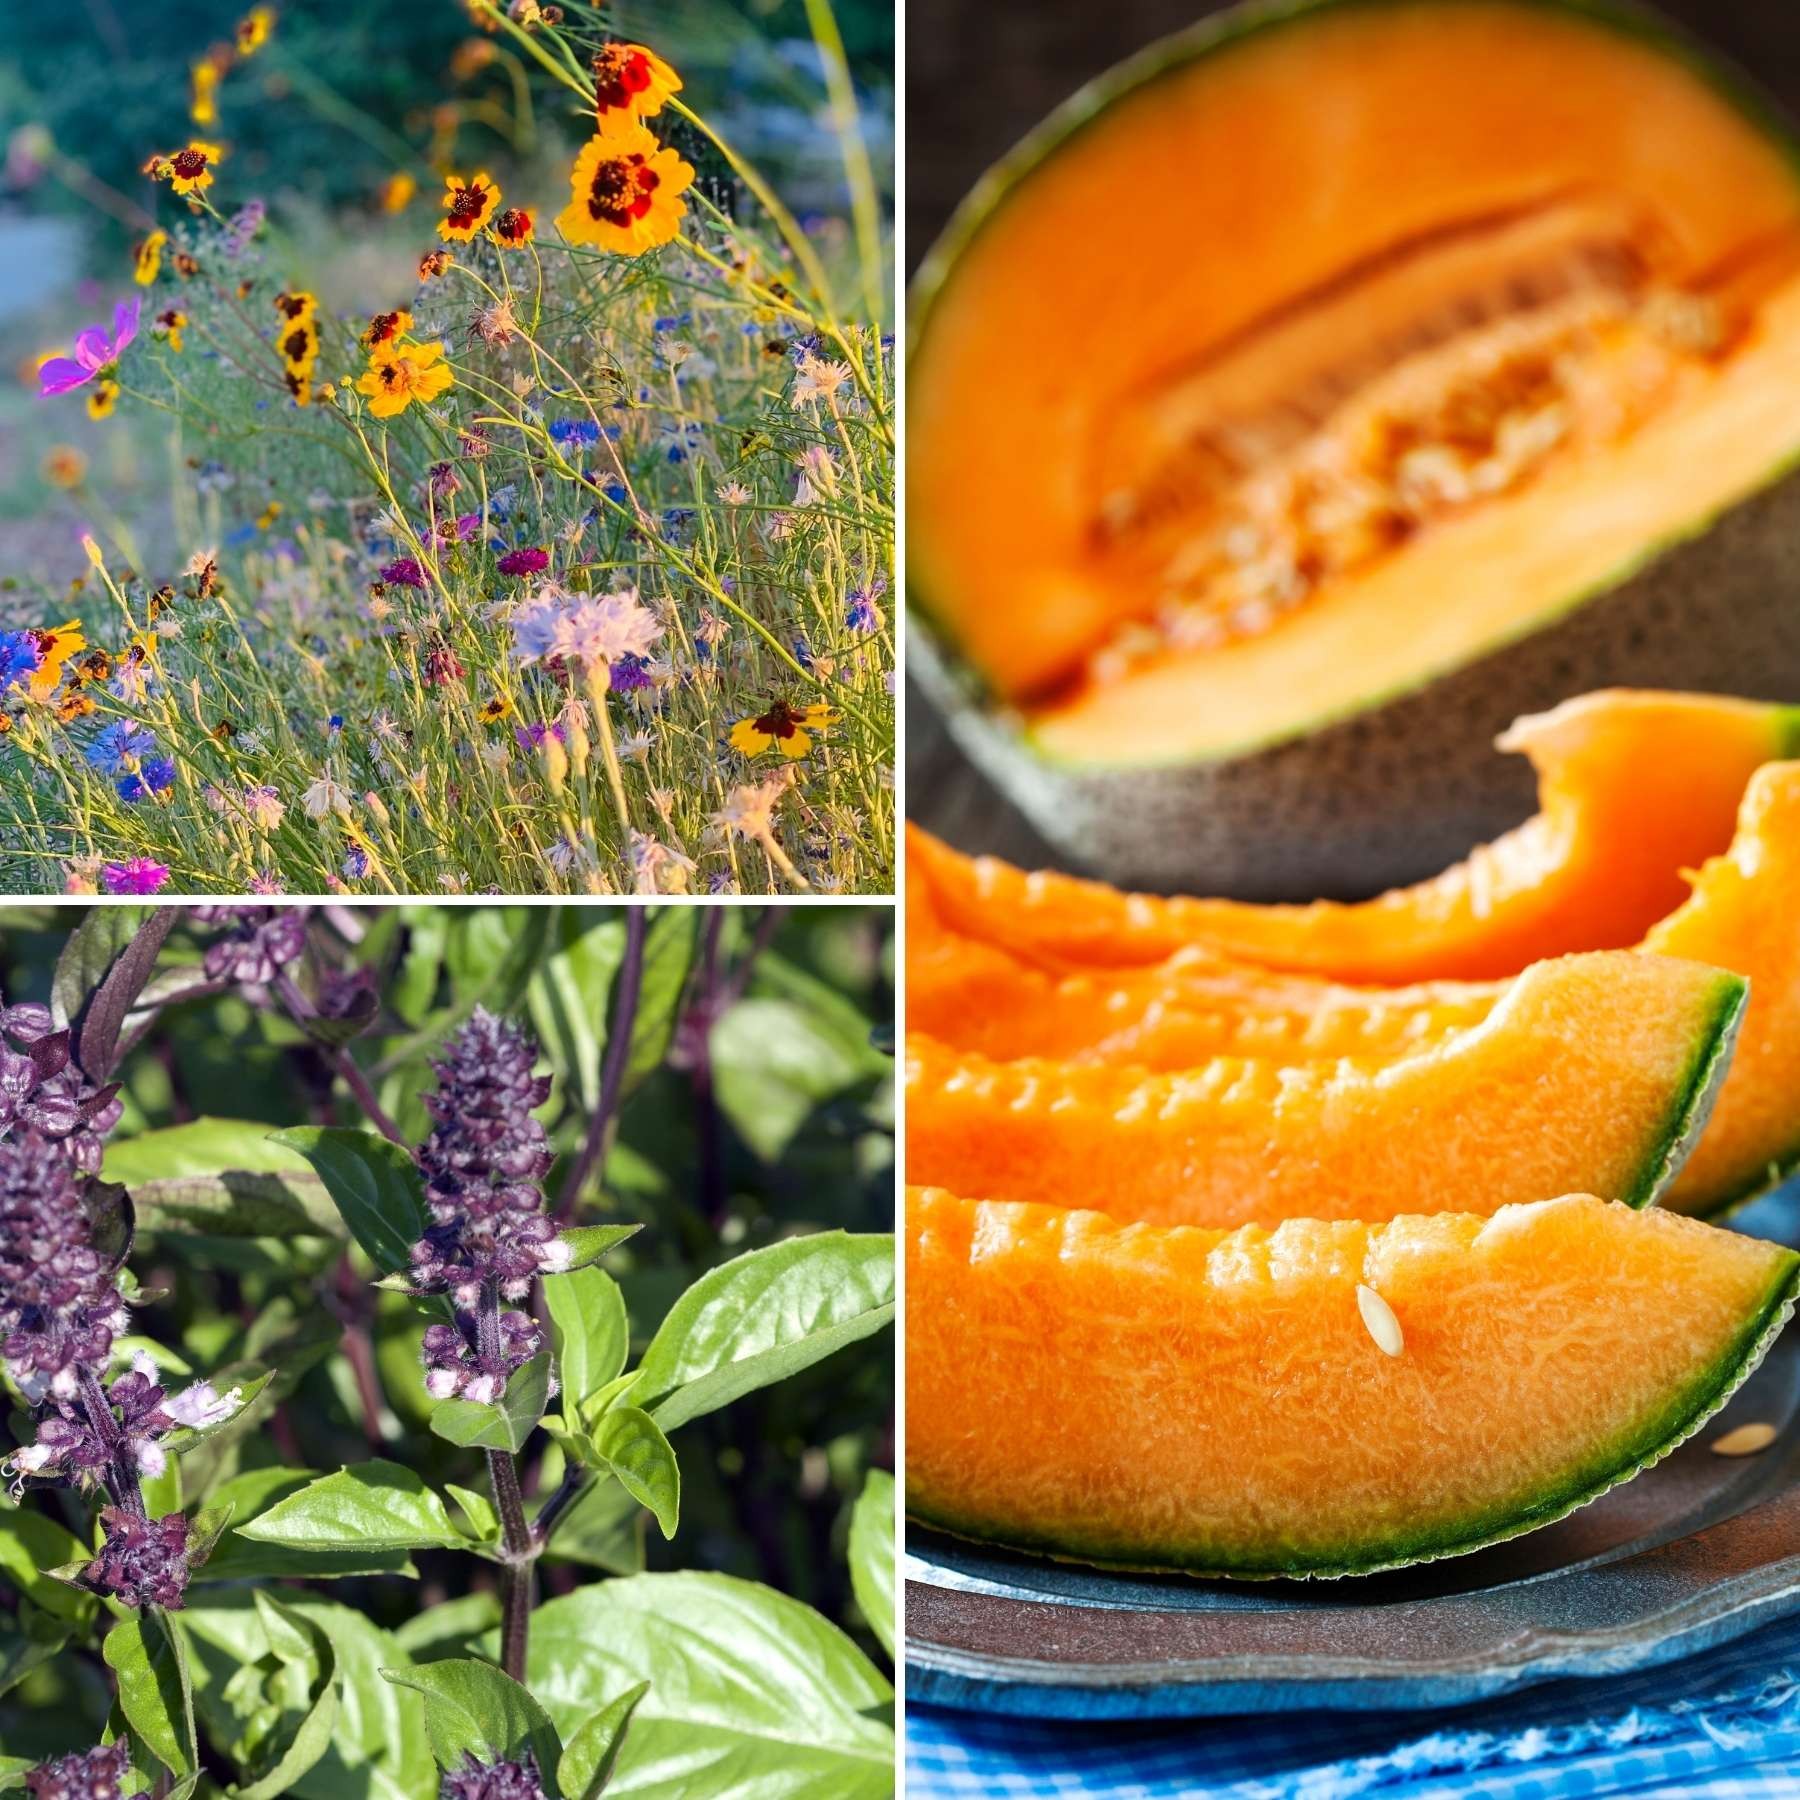 Grow flowers, fruits and herbs for a healthy garden